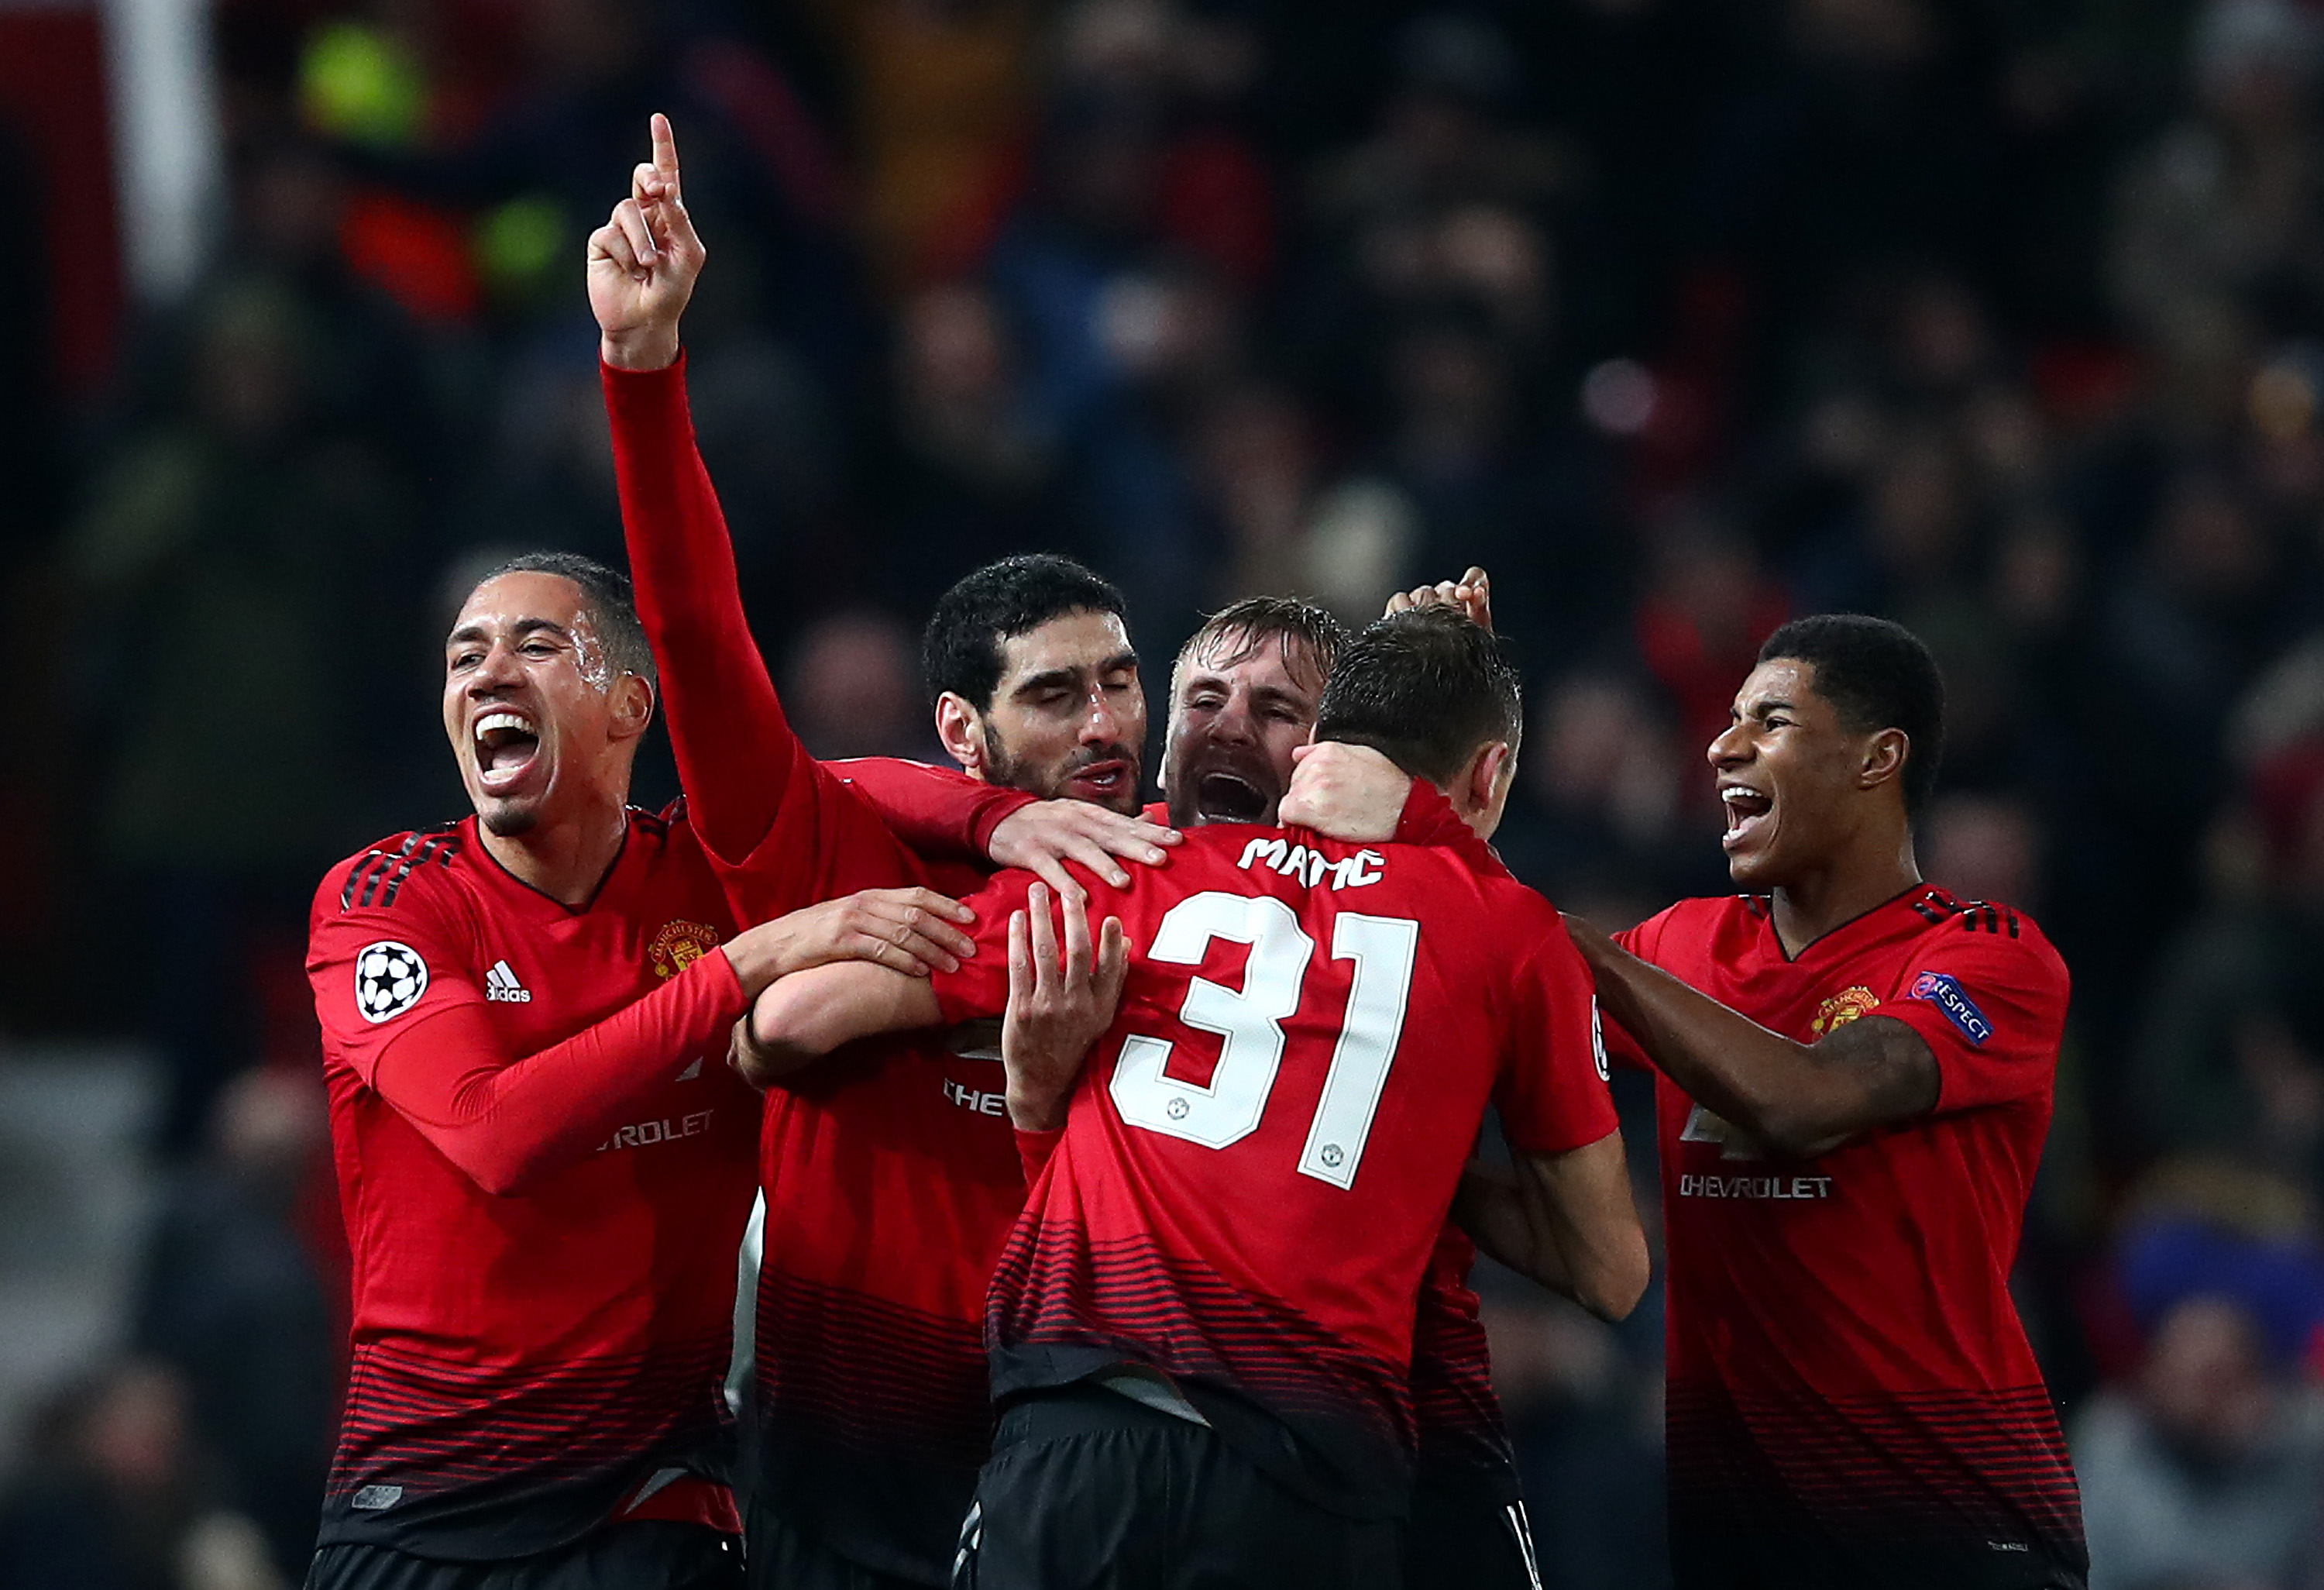 MANCHESTER, ENGLAND - NOVEMBER 27:  Marouane Fellaini of Manchester United celebrates with team mates Marcus Rashford, Nemanja Matic, Luke Shaw and Chris Smalling after scoring their team's first goal during the Group H match of the UEFA Champions League between Manchester United and BSC Young Boys at Old Trafford on November 27, 2018 in Manchester, United Kingdom. (Photo by Clive Brunskill/Getty Images)